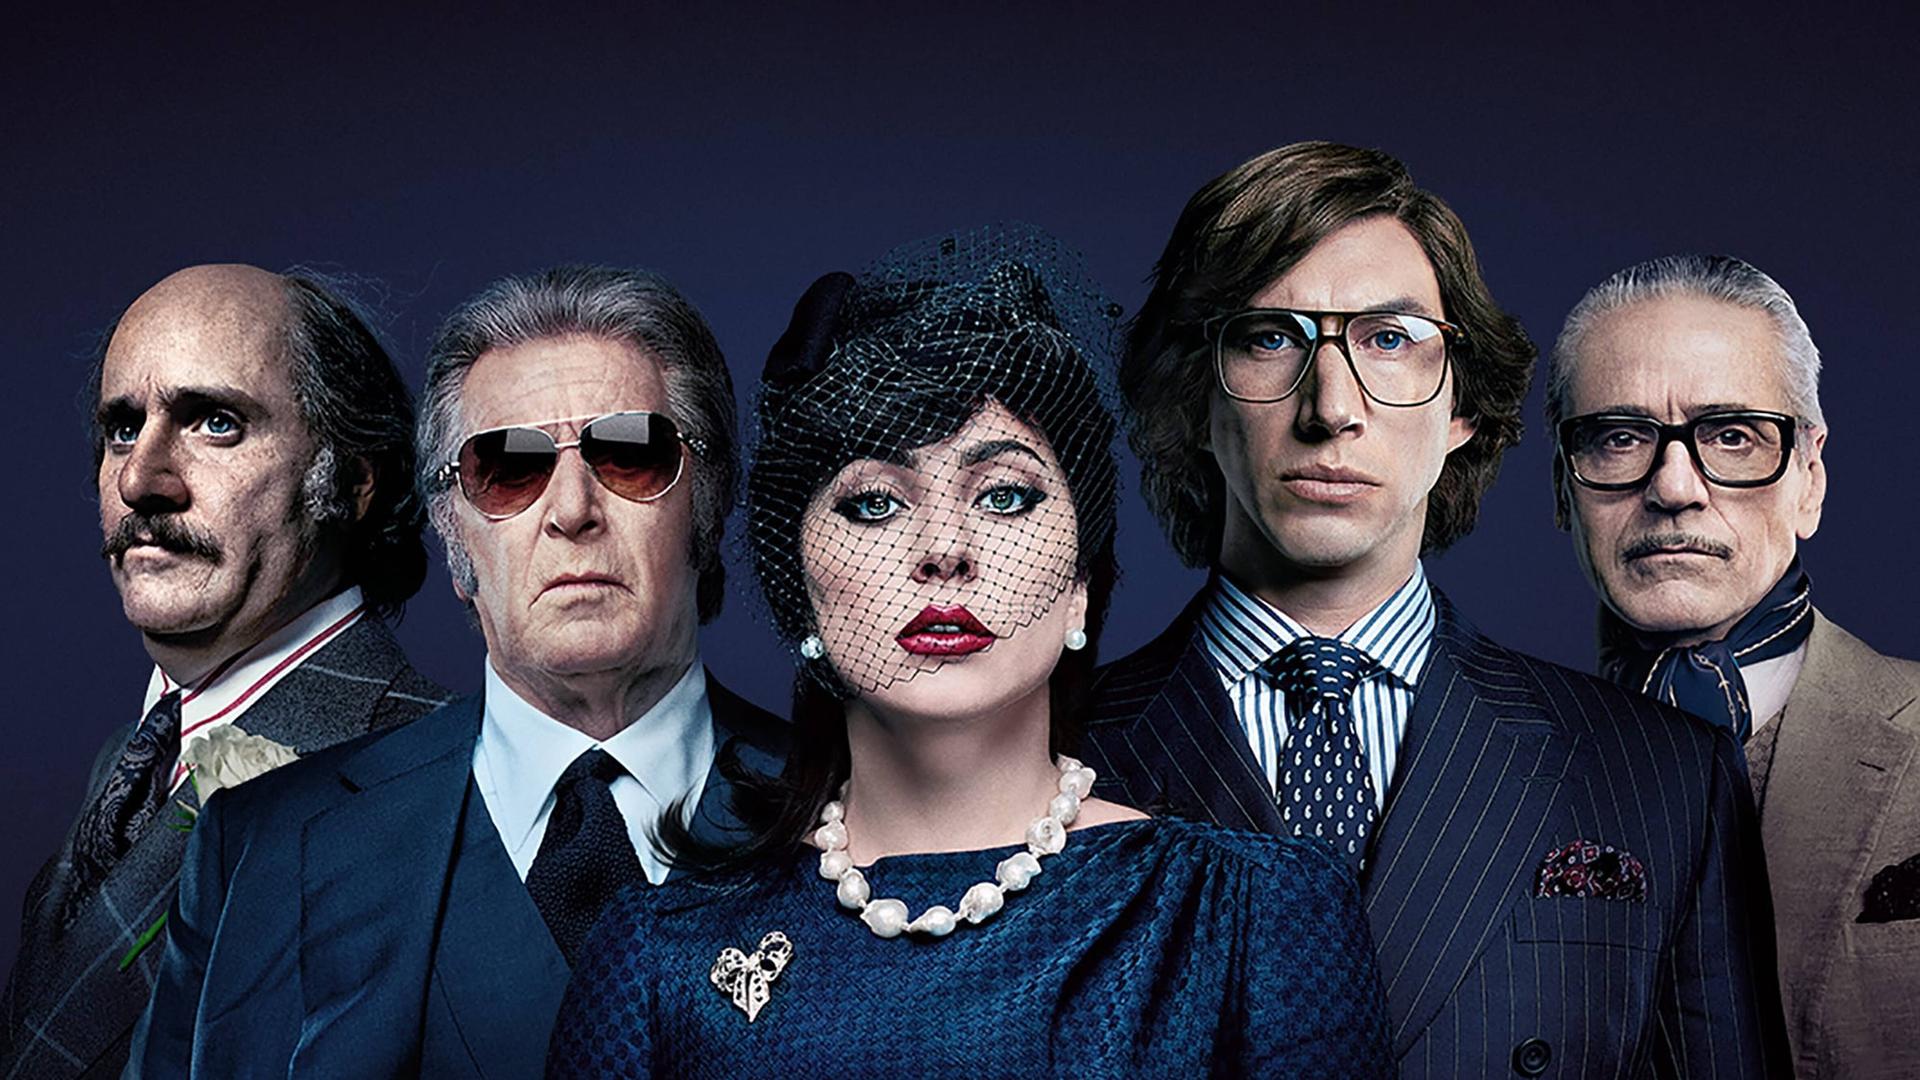 The House of Gucci: A Sensational Story of Murder, Madness, Glamour, and Greed von Ridley Scott mit Jared Leto, Al Pacino, Lady Gaga, Adam Driver und Jeremy Irons. 